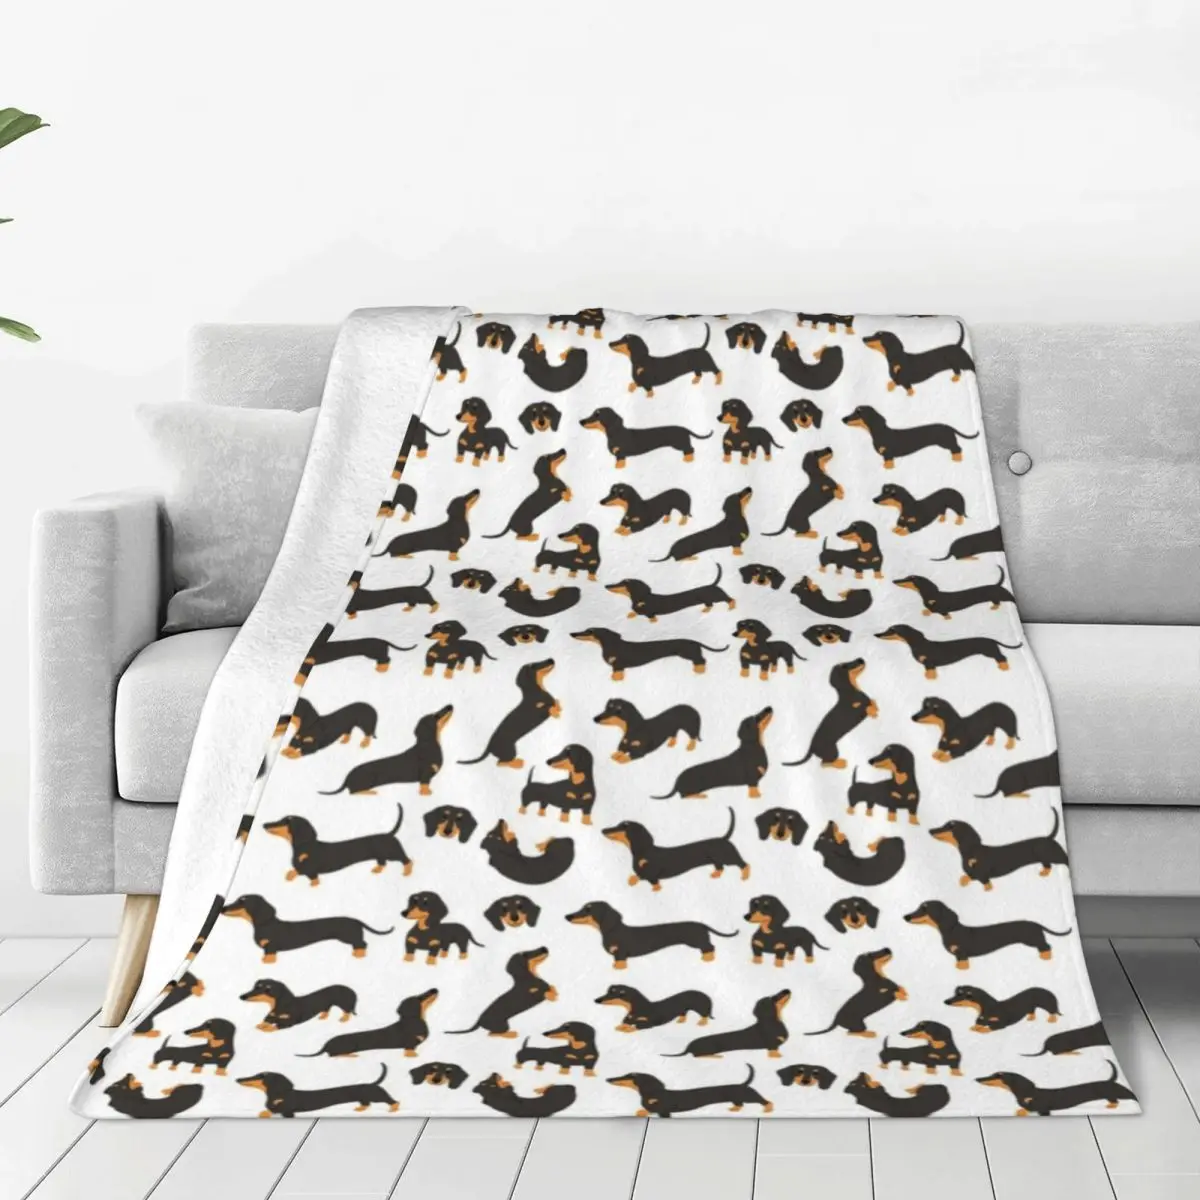 

Cute Dachshund Dogs Blanket Coral Fleece Plush Printed Dog Lover Portable Soft Throw Blanket for Home Car Bedding Throws